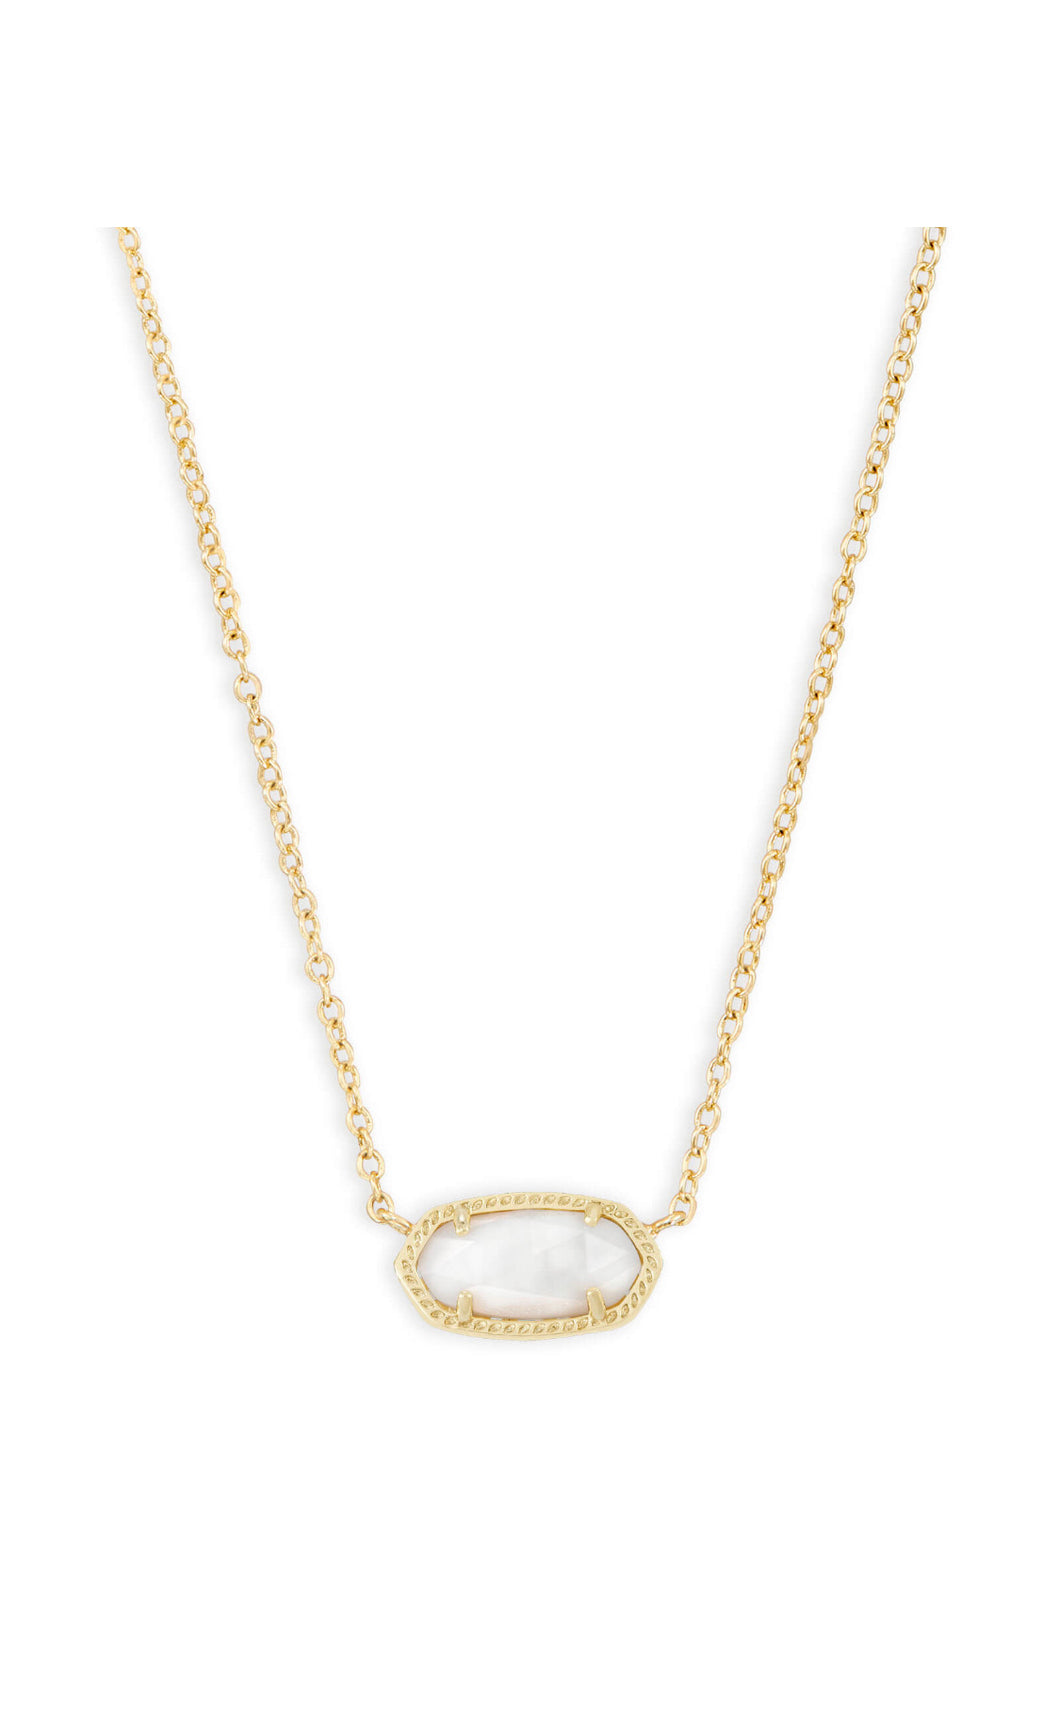 Kendra Scott: Elisa Gold Necklace in White Mother-Of-Pearl